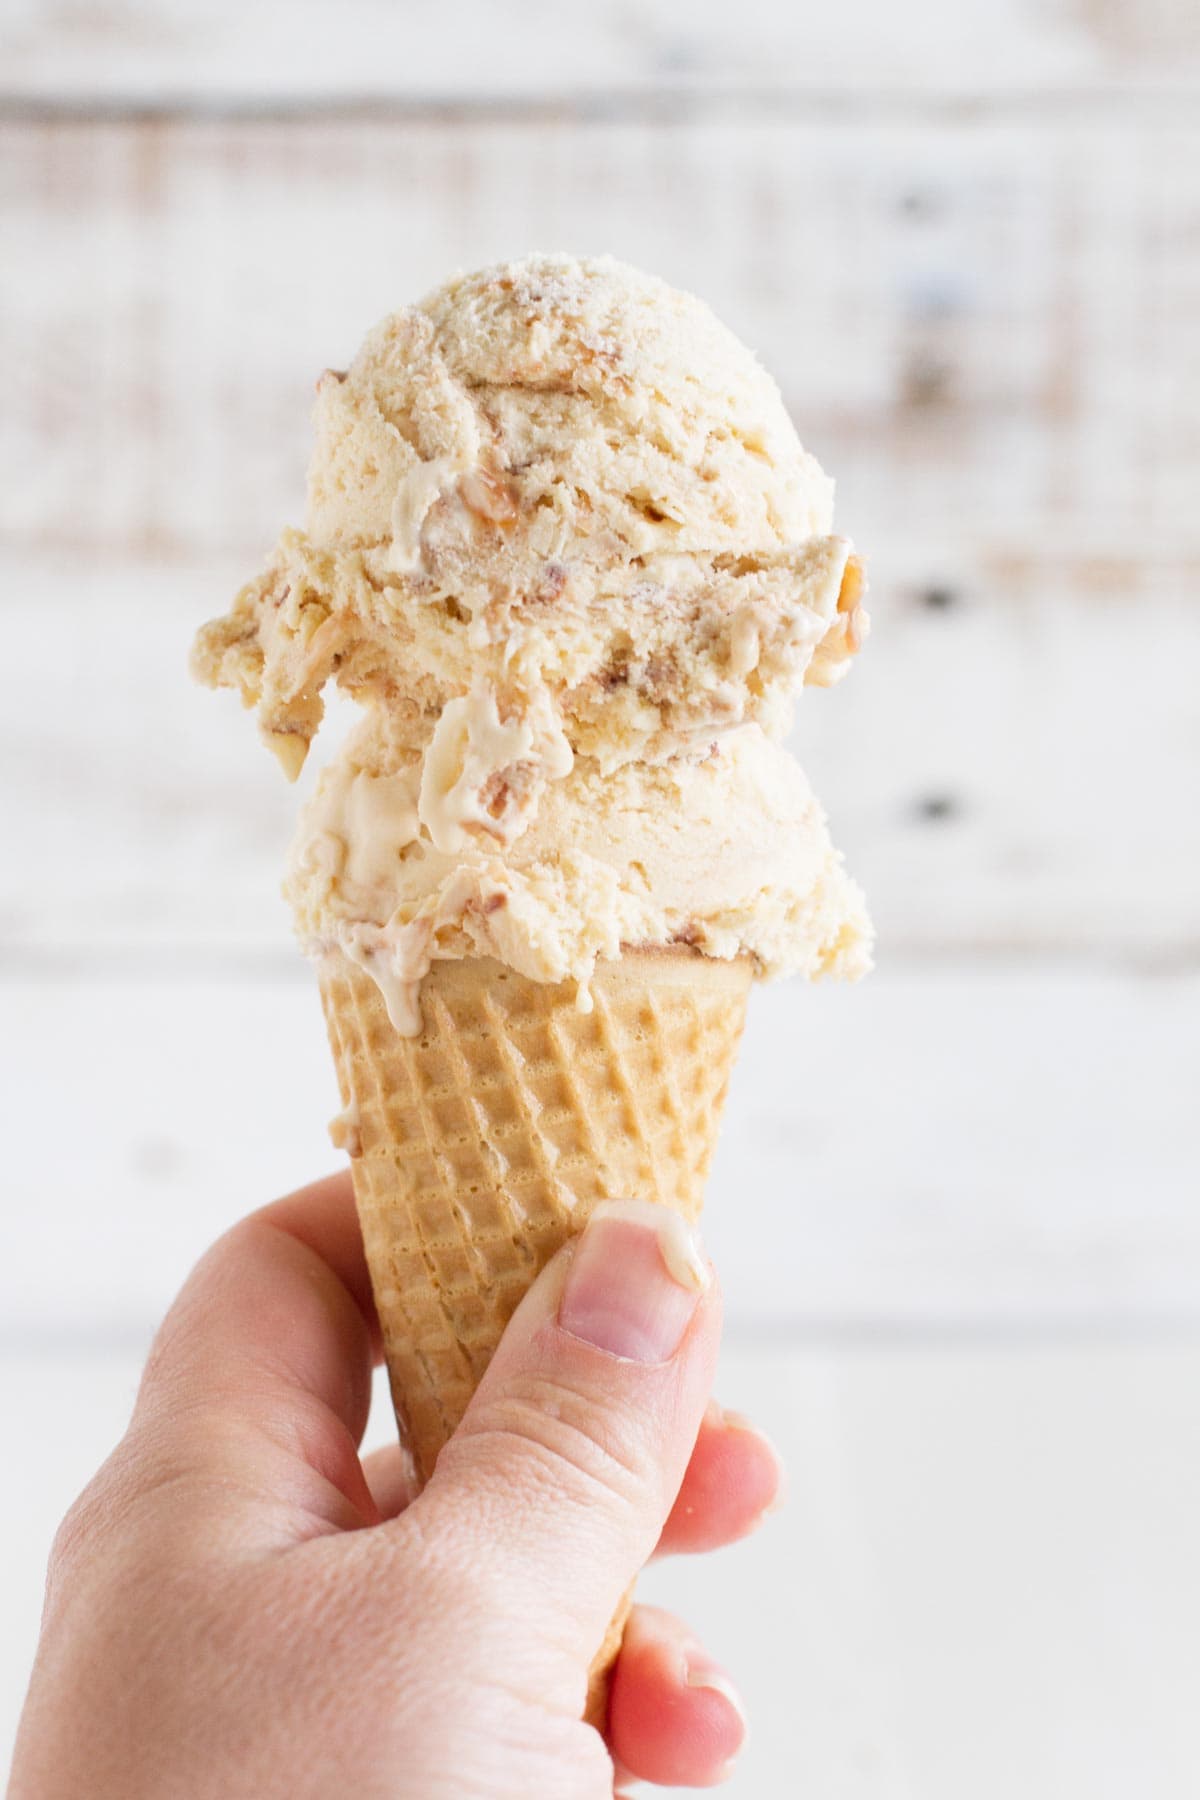 Ice cream cone with salted caramel ice cream with fudge and toasted coconut.